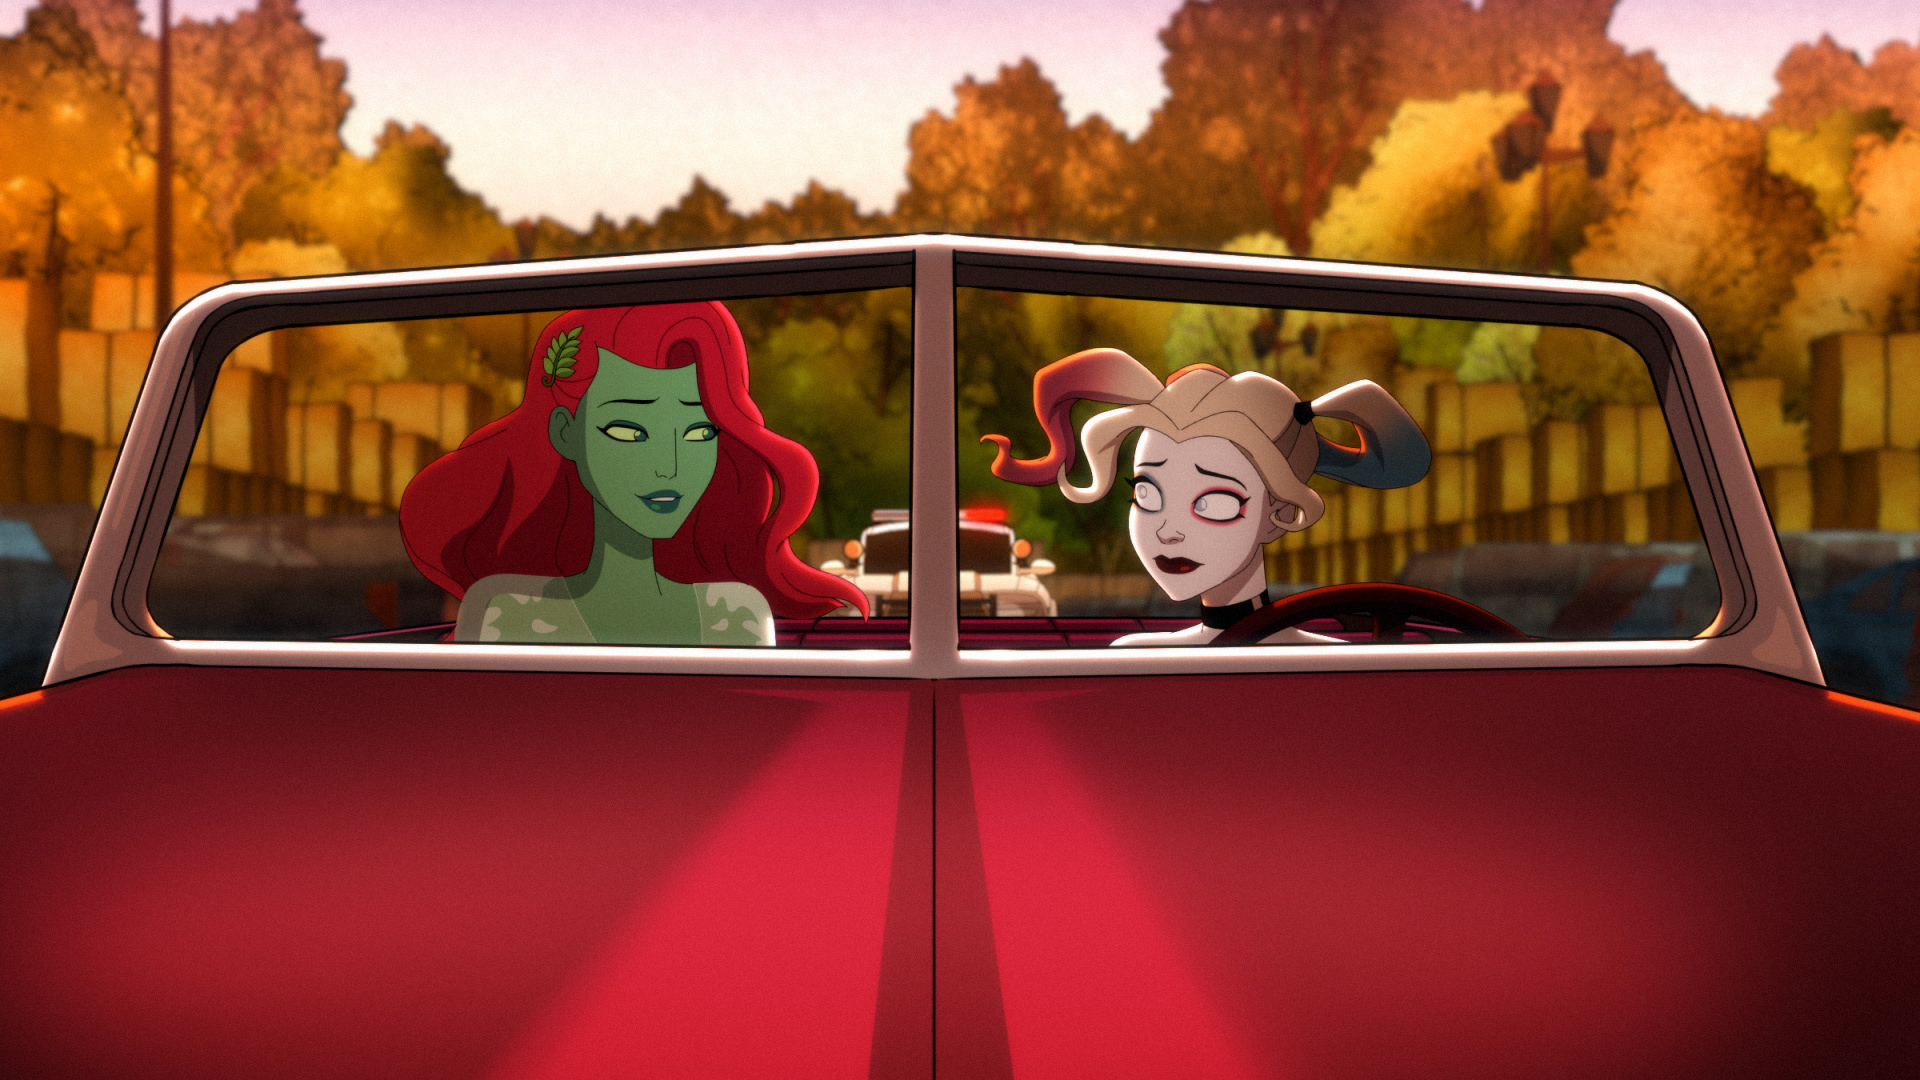 Poison Ivy and Harley Quinn driving off into the sunset, so to speak.